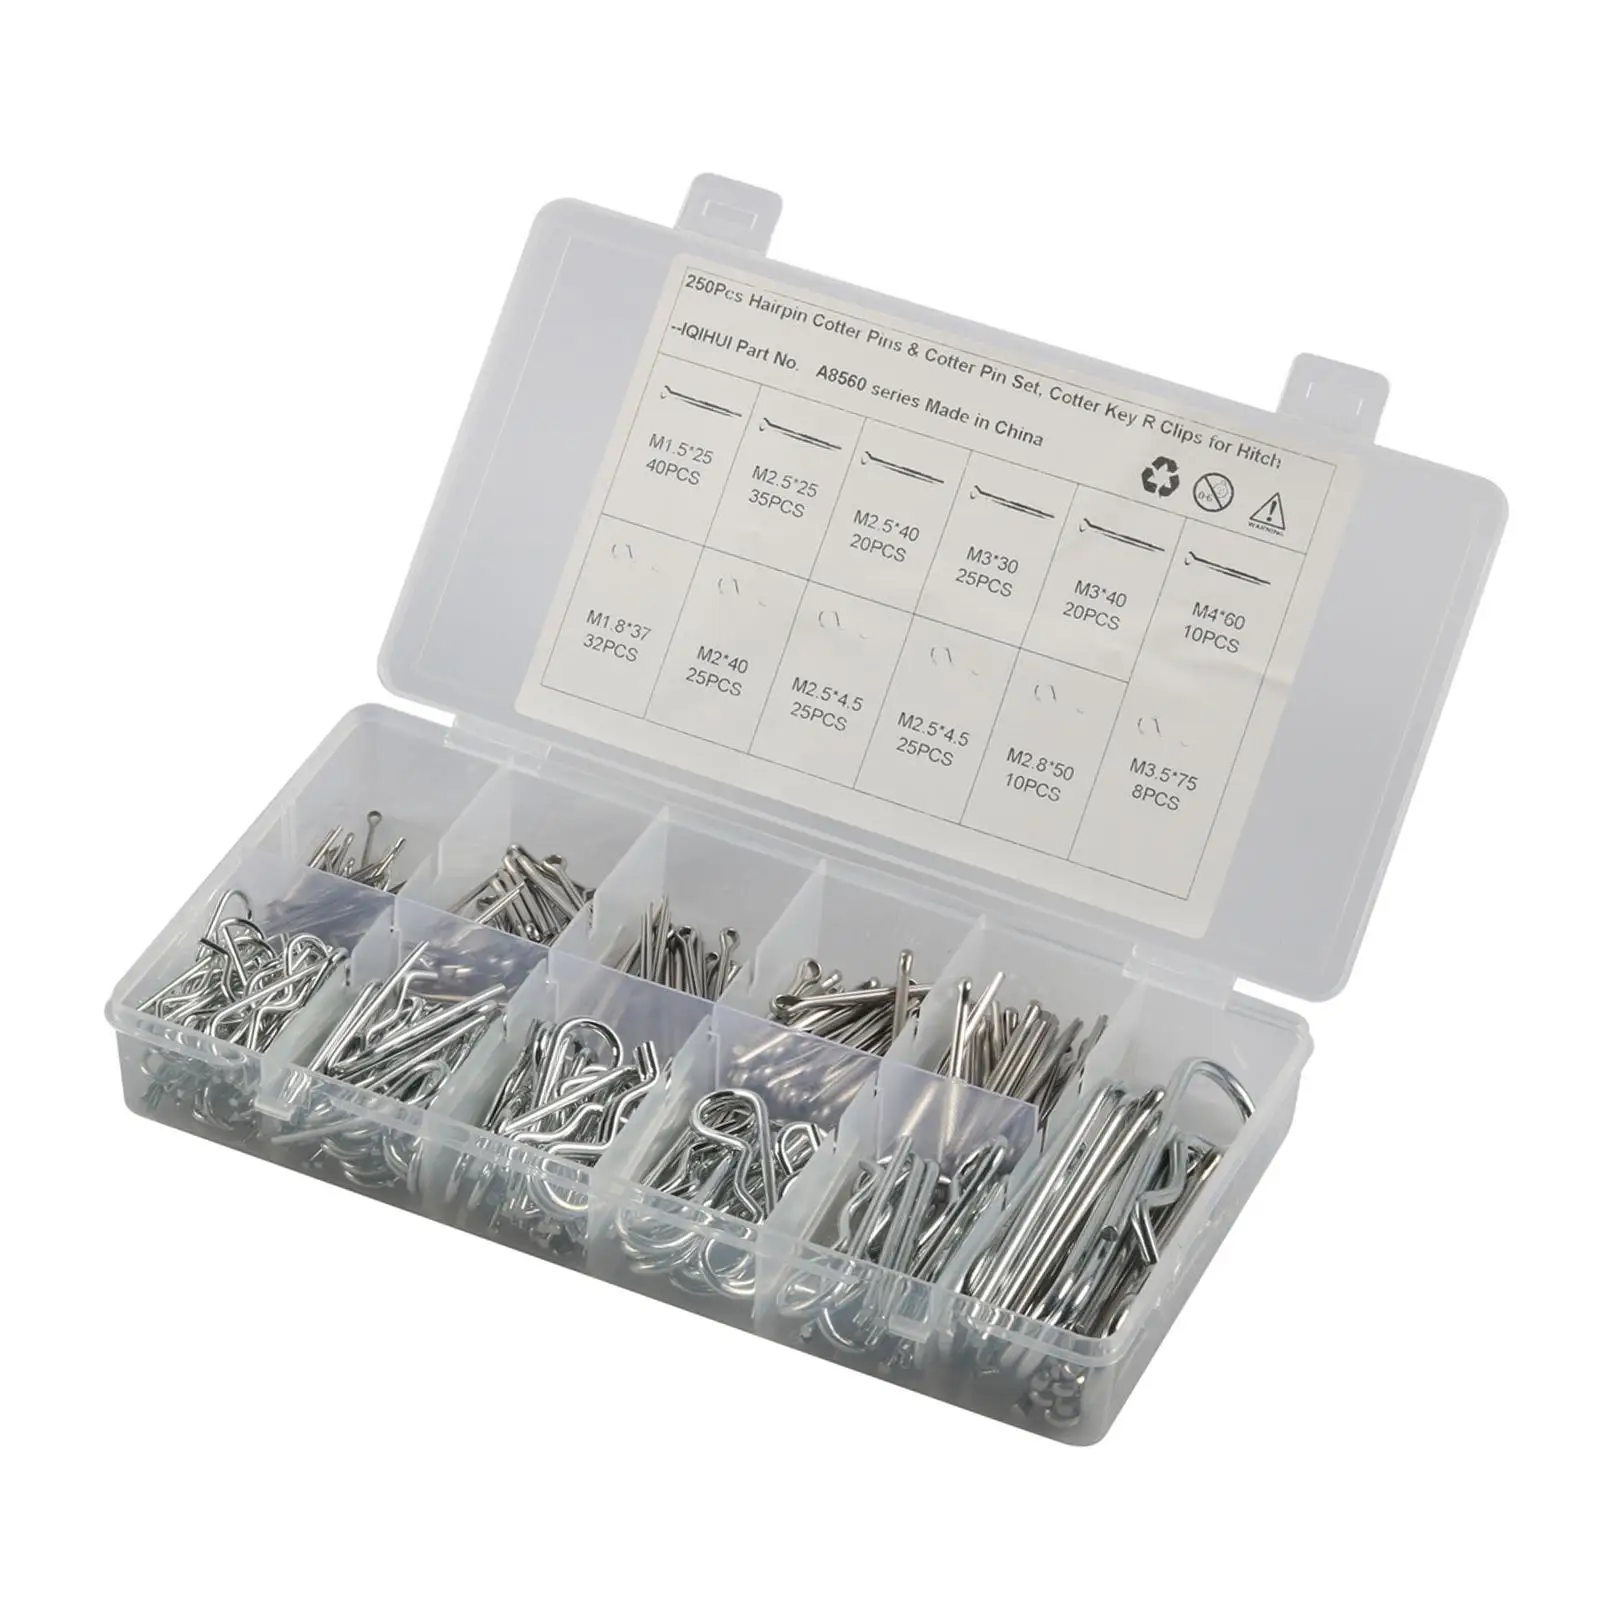 

250 Pieces Cotter Pin Spring Fastener Kit Fixings Quality Cotter Pin Hairpin Set Sturdy Hitch Pins Clips Locking Set for Carts